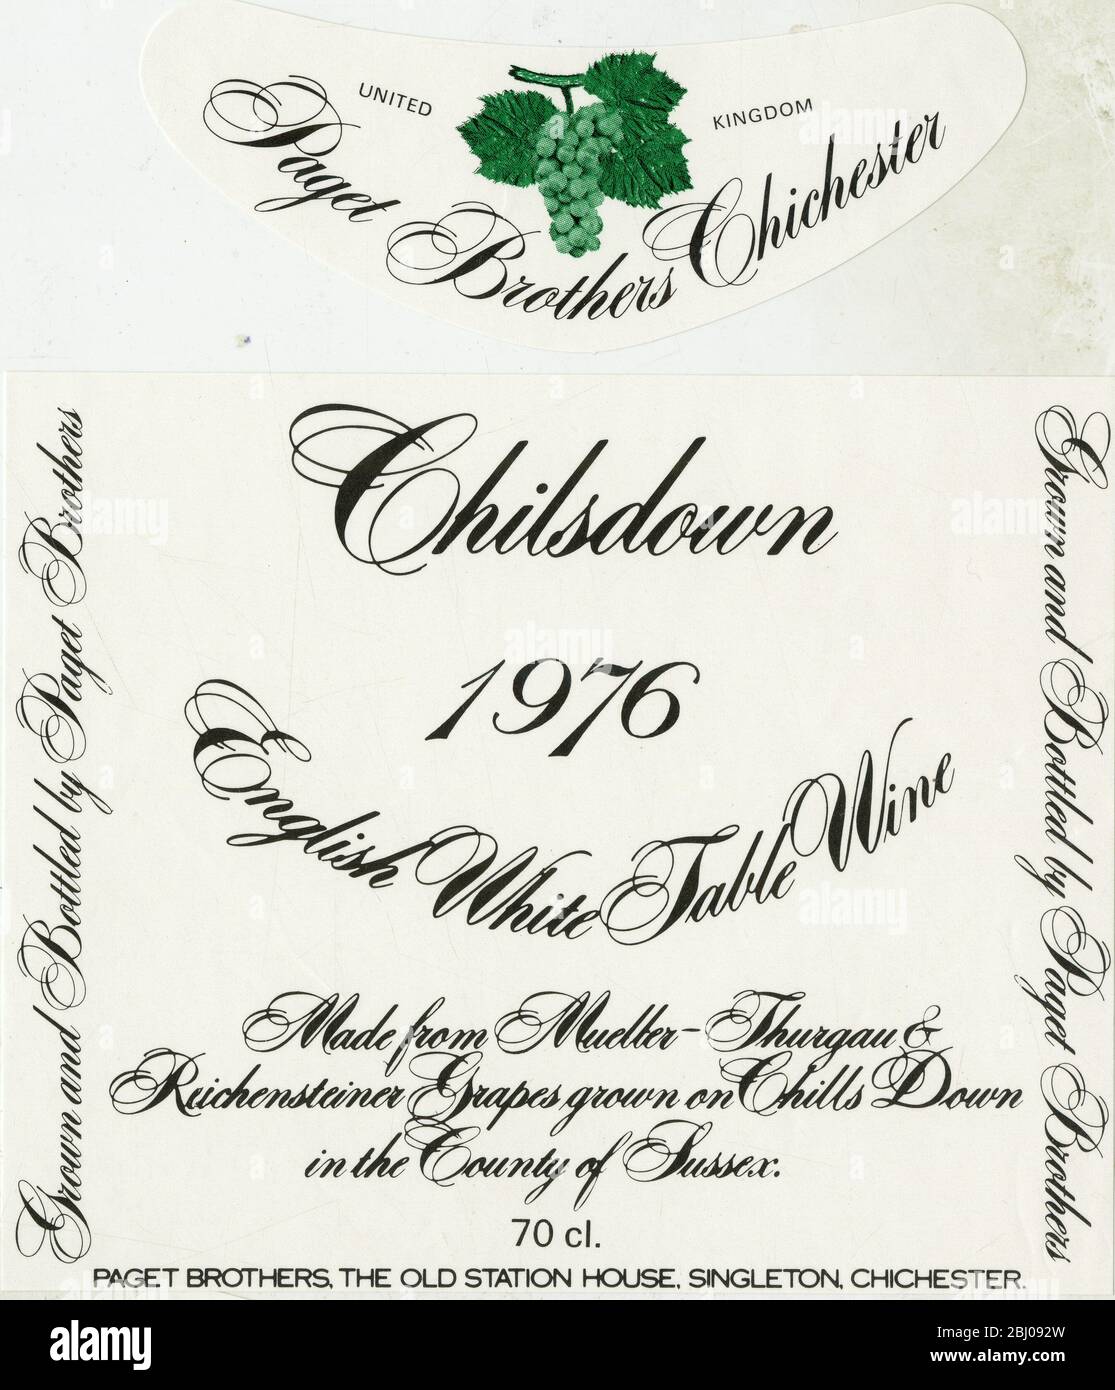 Wine Label. - Chilsdown. 1976. English White Table Wine. Made from Mueller Thurgau and Richensteiner Grapes grown on Chillsdown in the county of Sussex. - Paget Brothers, The Old Station House, Singleton Chichester. - - Stock Photo